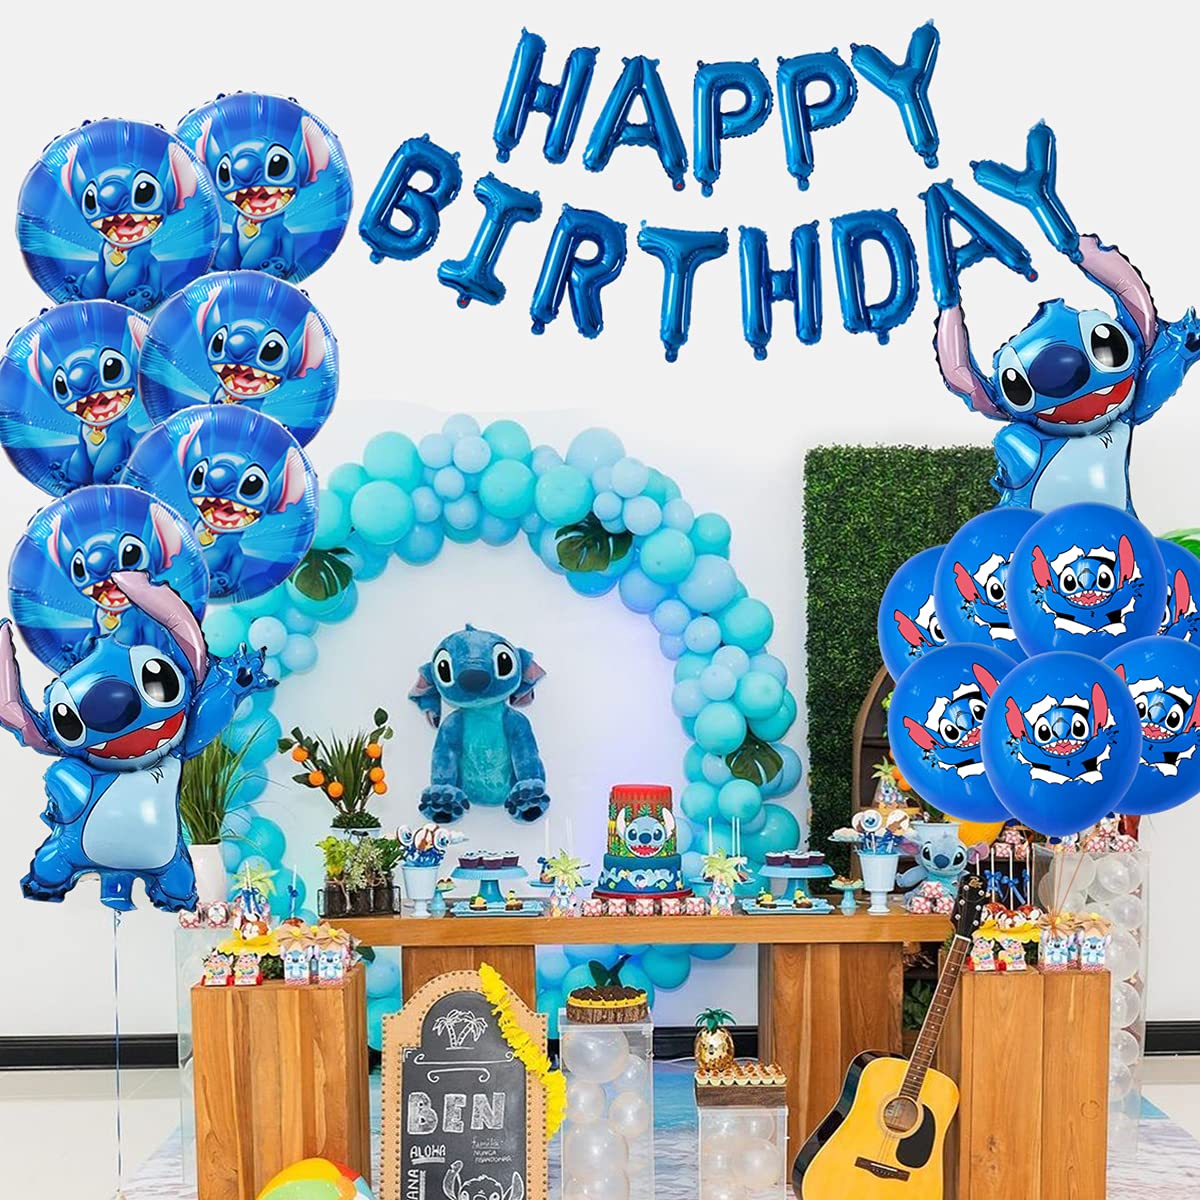 36PCS Lilo and Stitch Balloons, Stitch Happy Birthday Balloons Aluminum Foil Letters Banner Balloons Decoration, Children's Birthday Party Supplies